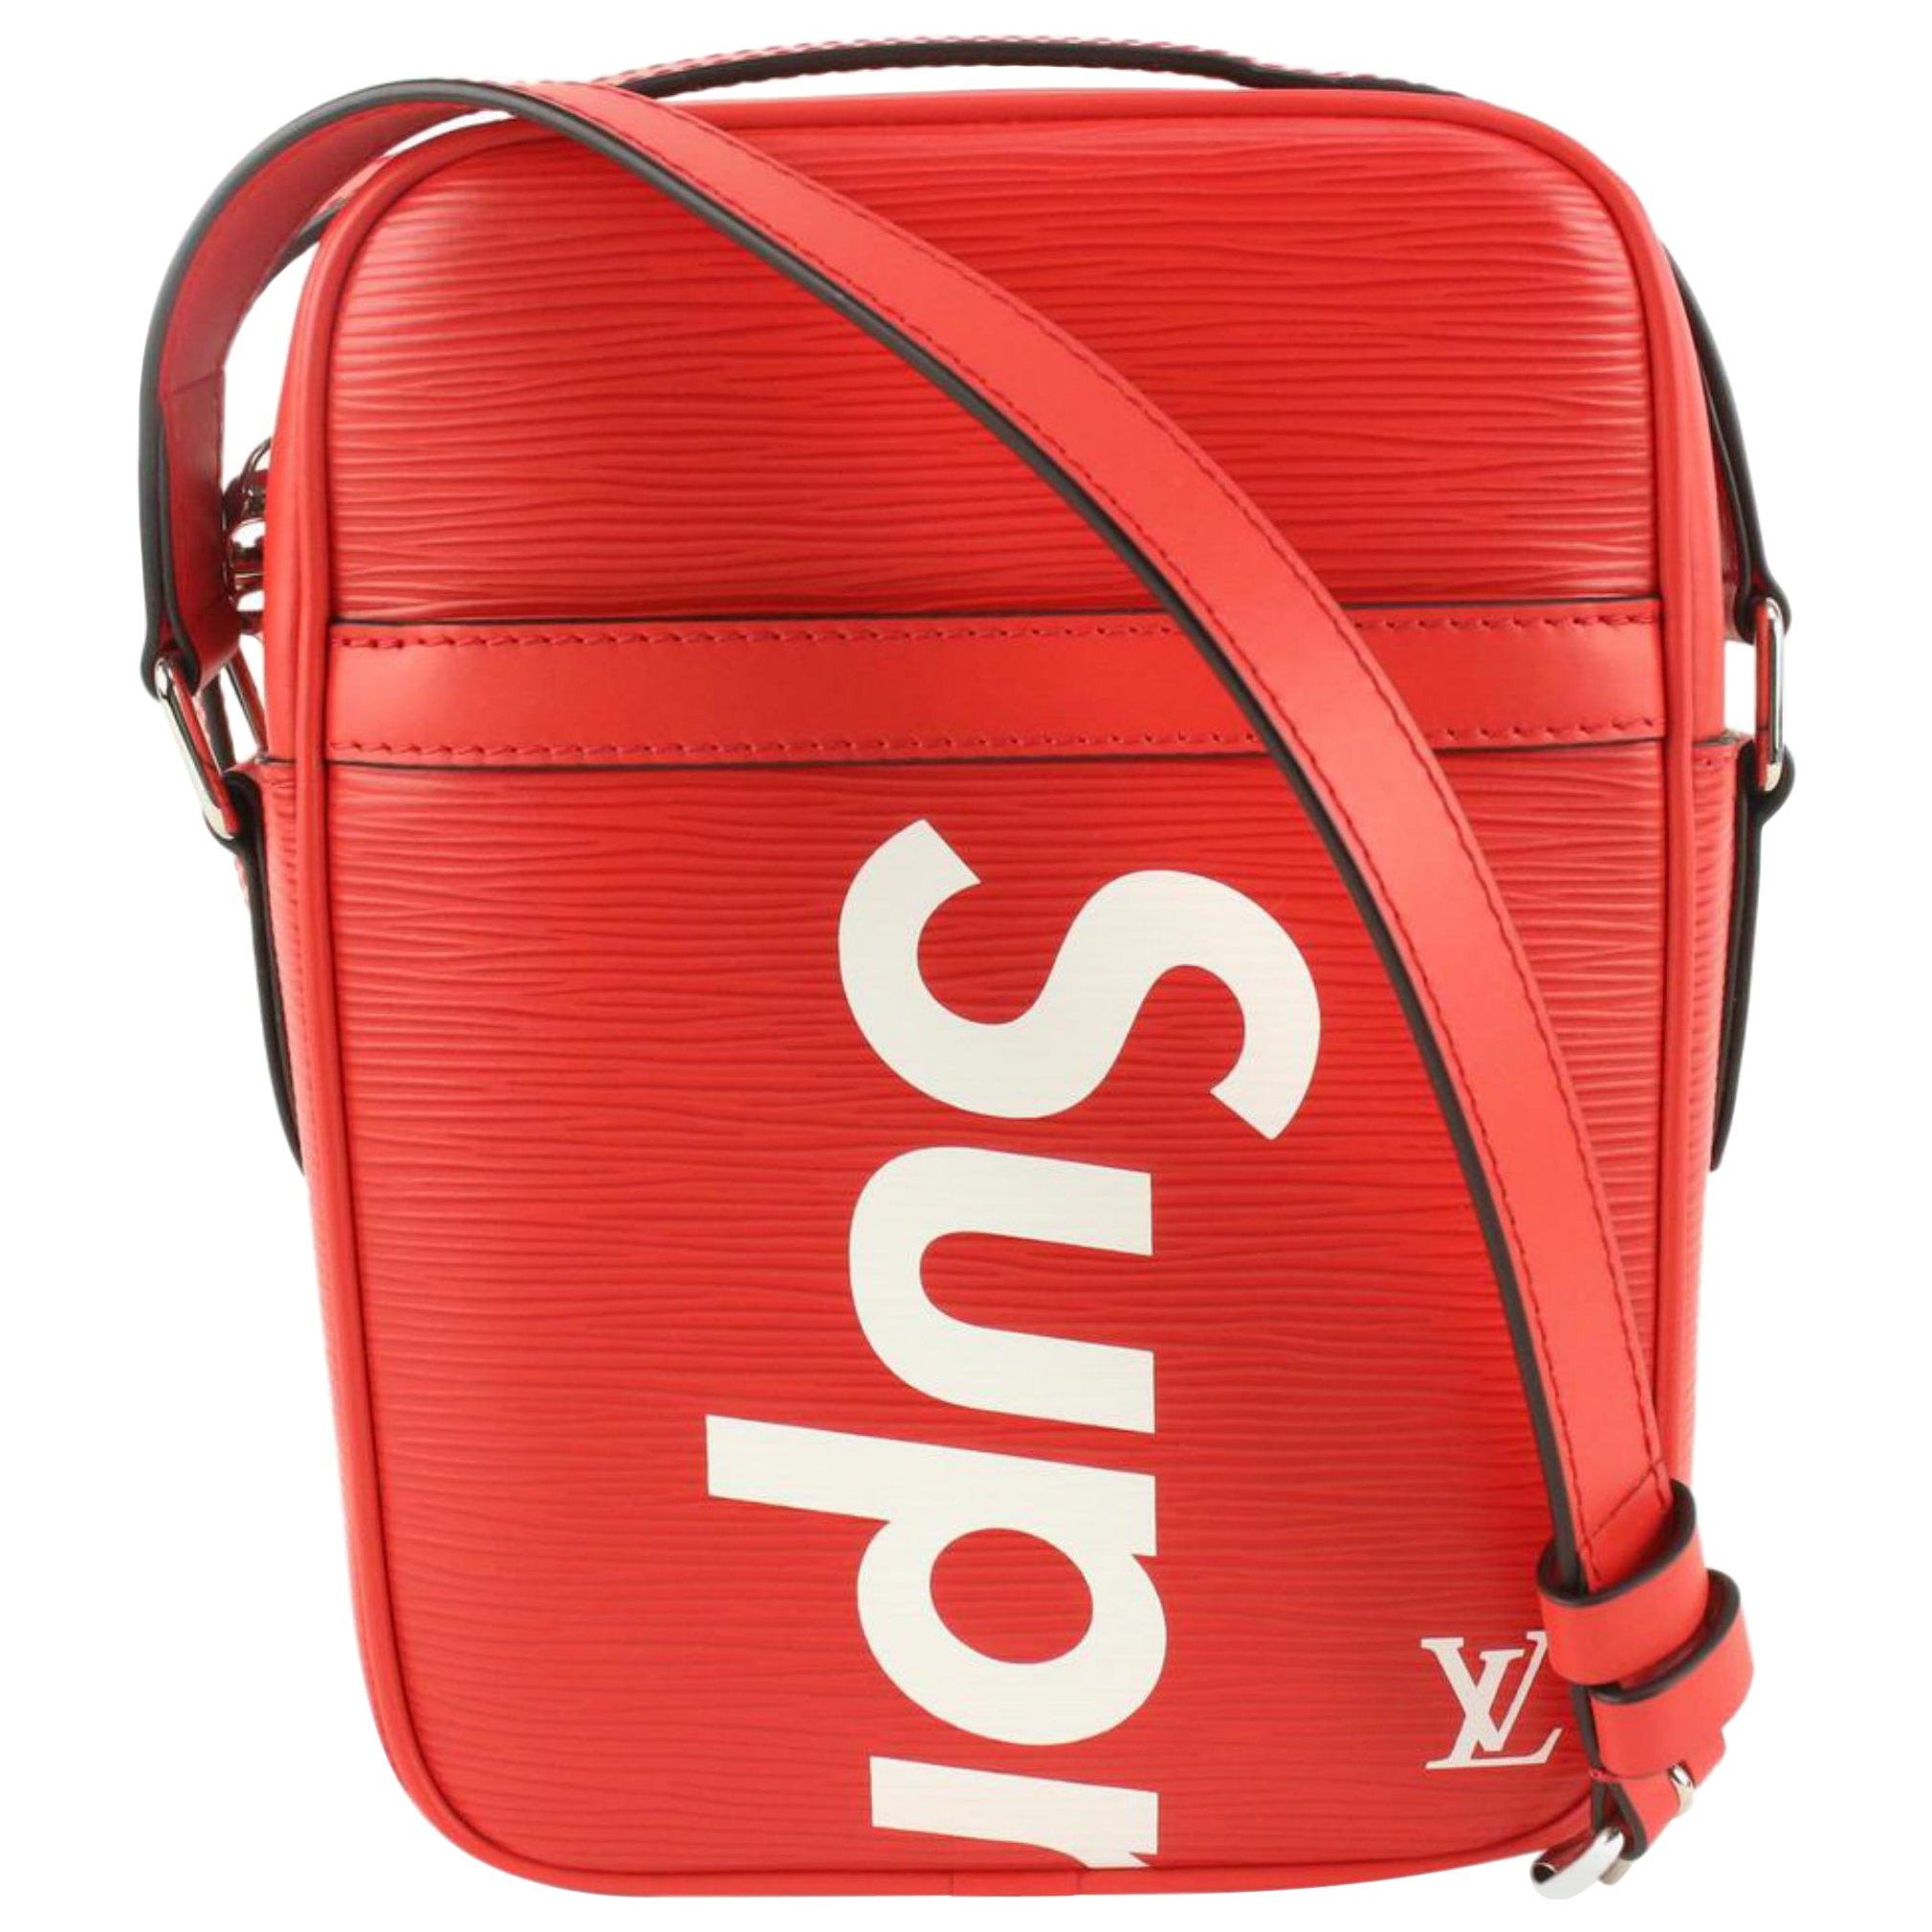 Louis Vuitton - Supreme Backpack - Epi Leather - SHW